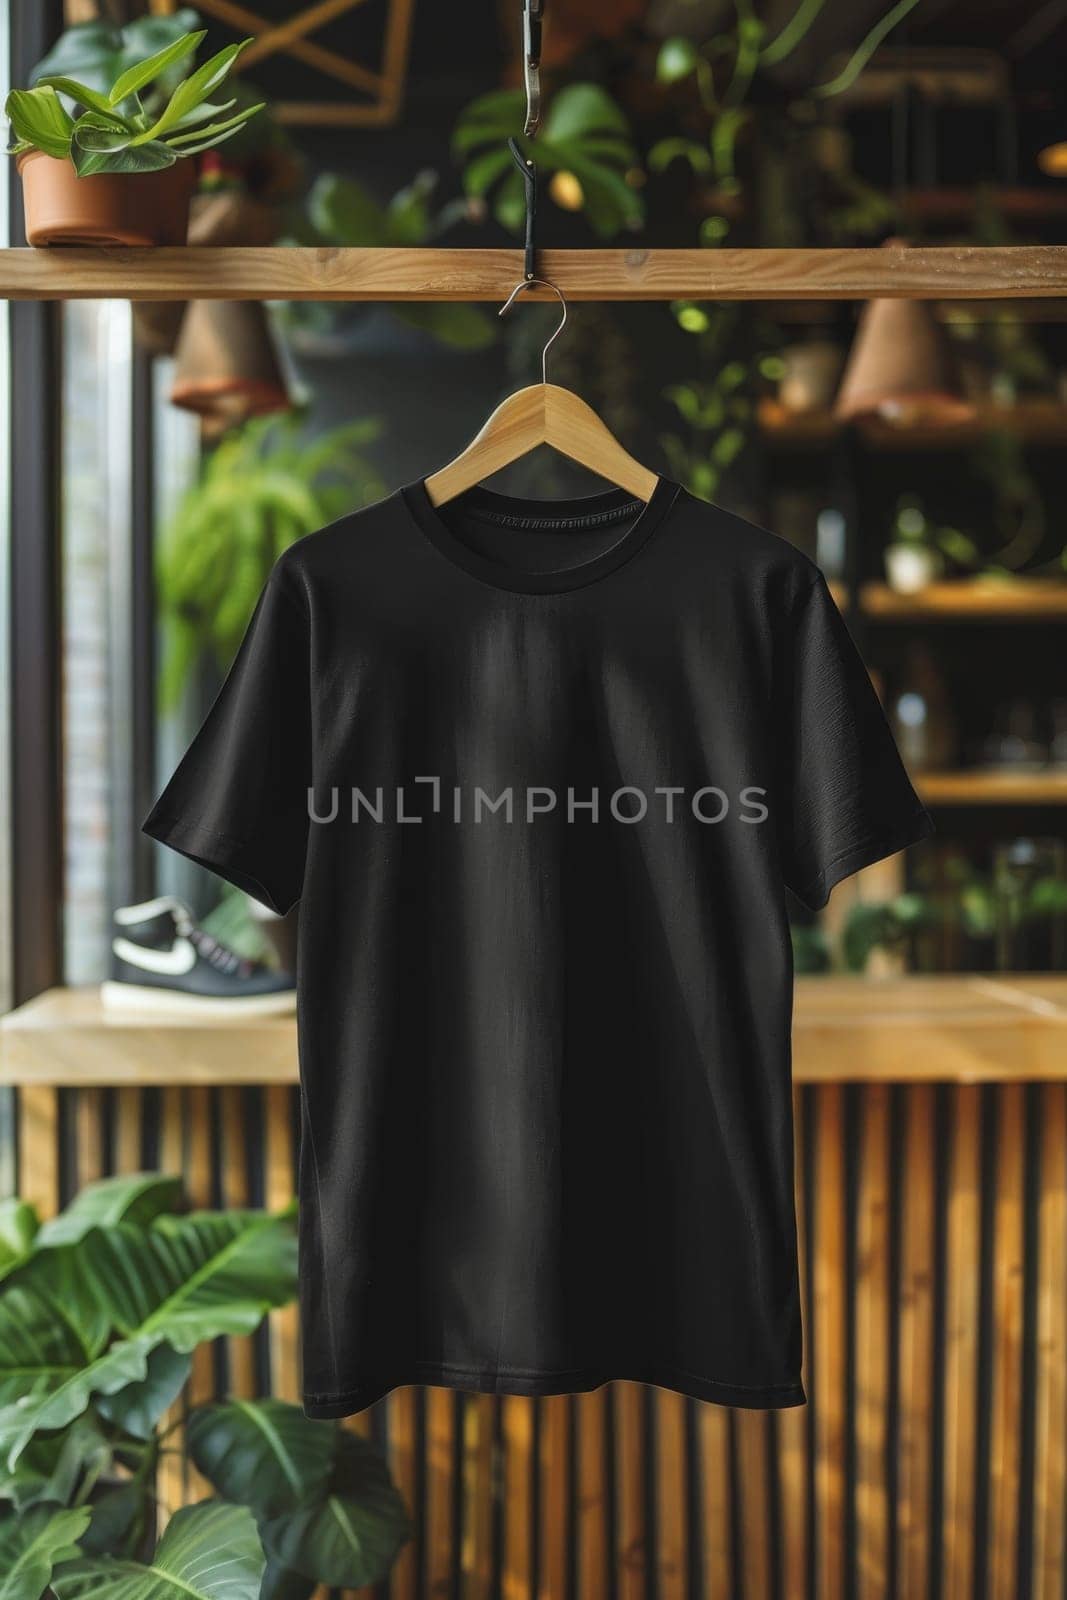 A black shirt hanging on a hanger in front of a wooden counter